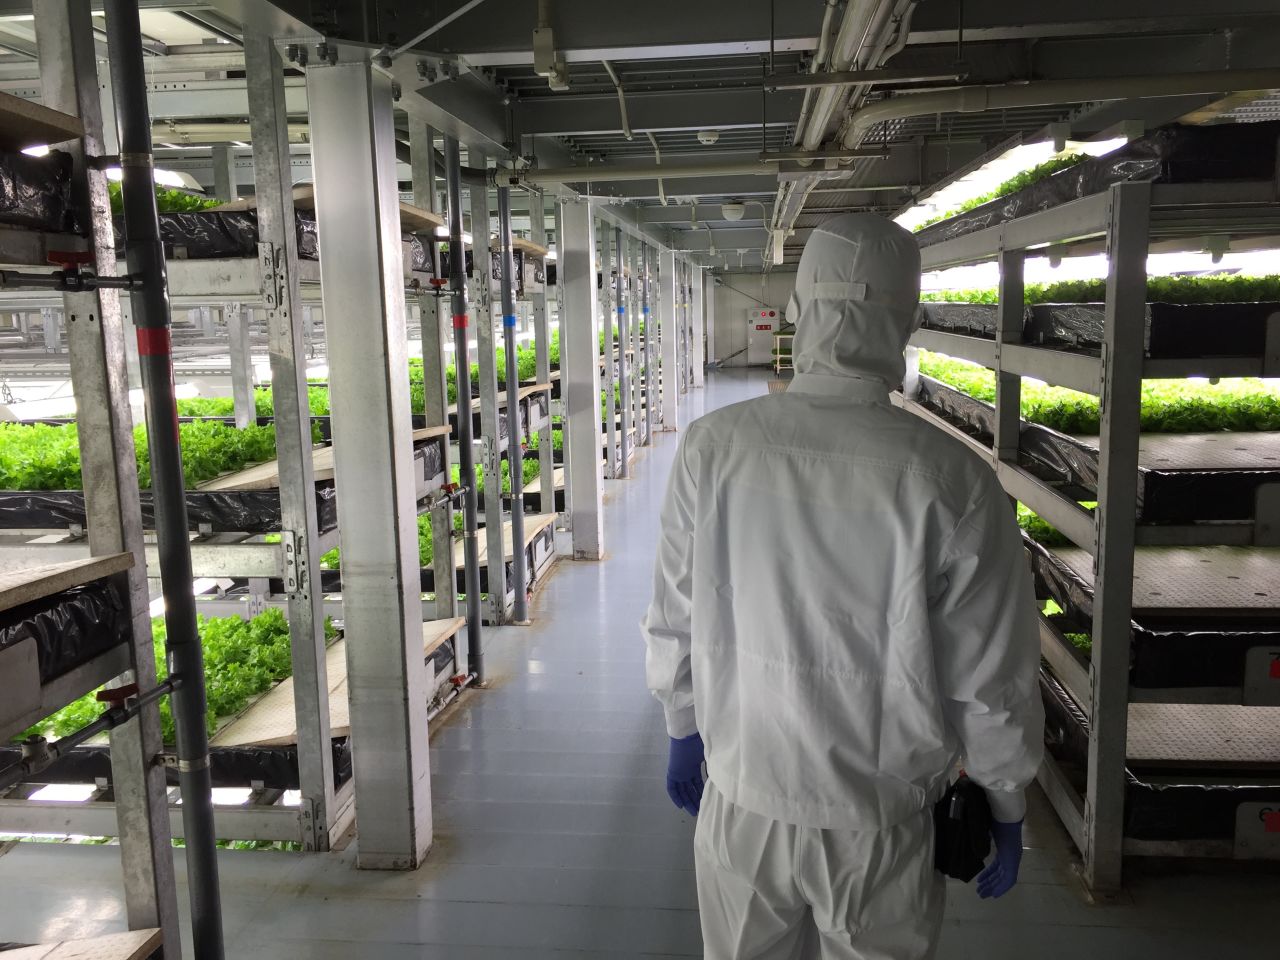 Japan adopted vertical farm technology relatively early. Spread, founded in 2006, says it shipped <a href="https://cnn.com/travel/article/kyoto-vertical-farm-spread/index.html">7.7 million </a>factory-grown heads of lettuce across Japan in 2015.